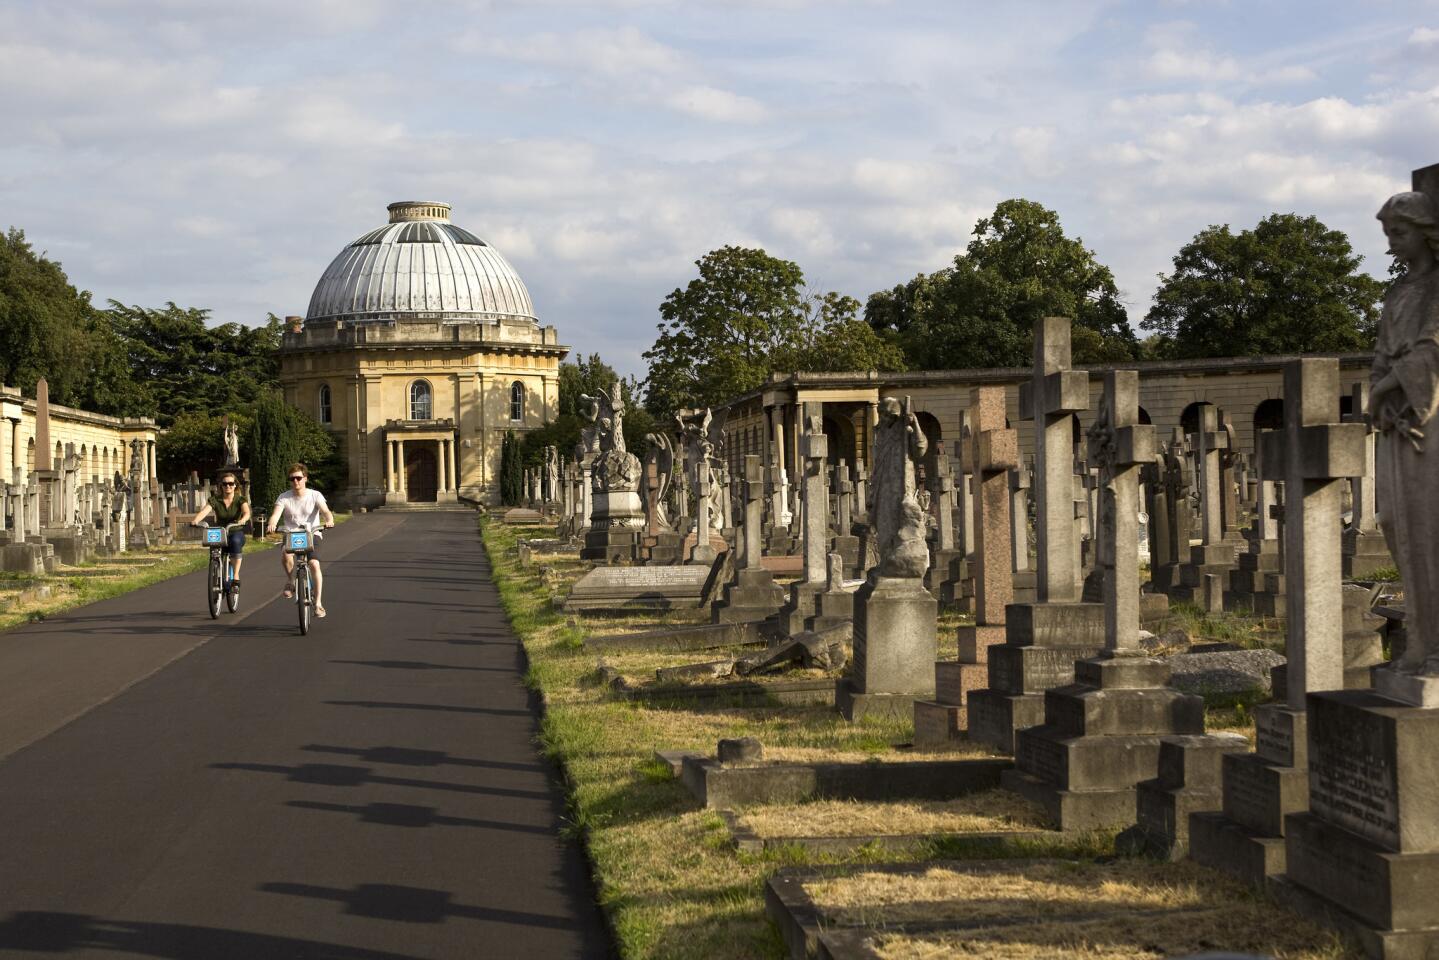 Brompton Cemetery, the most central of London's "Magnificent Seven" graveyards. Because of its rich history, London is one of the best cities for touring cemeteries. It's a through-the-looking-glass way of understanding a place and how it grew.